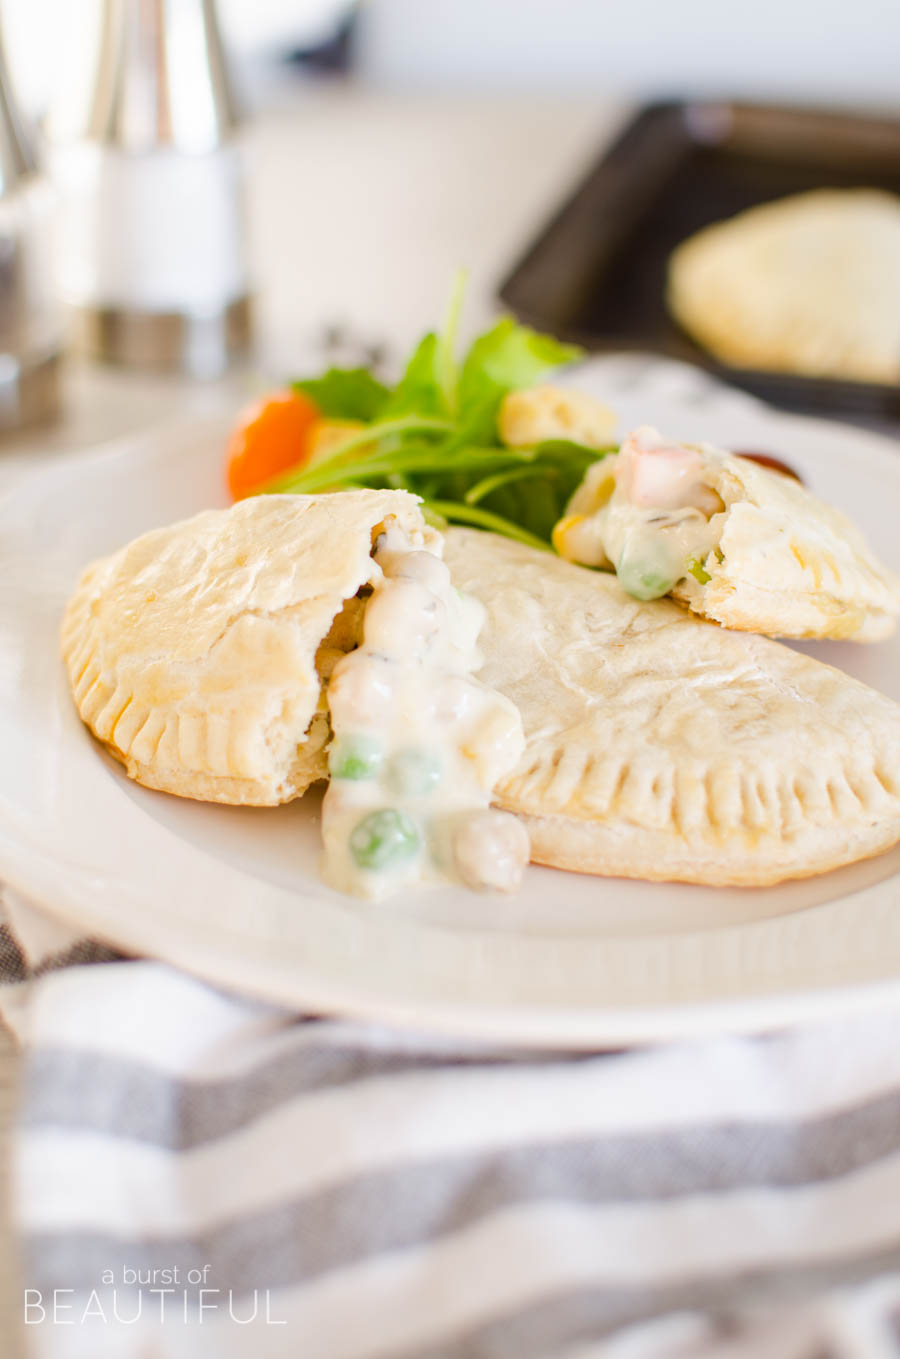 Vegetarian pot pies are a simple and healthy weeknight meal, the addition of chickpeas is a satisfying alternative to chicken | A Burst of Beautiful